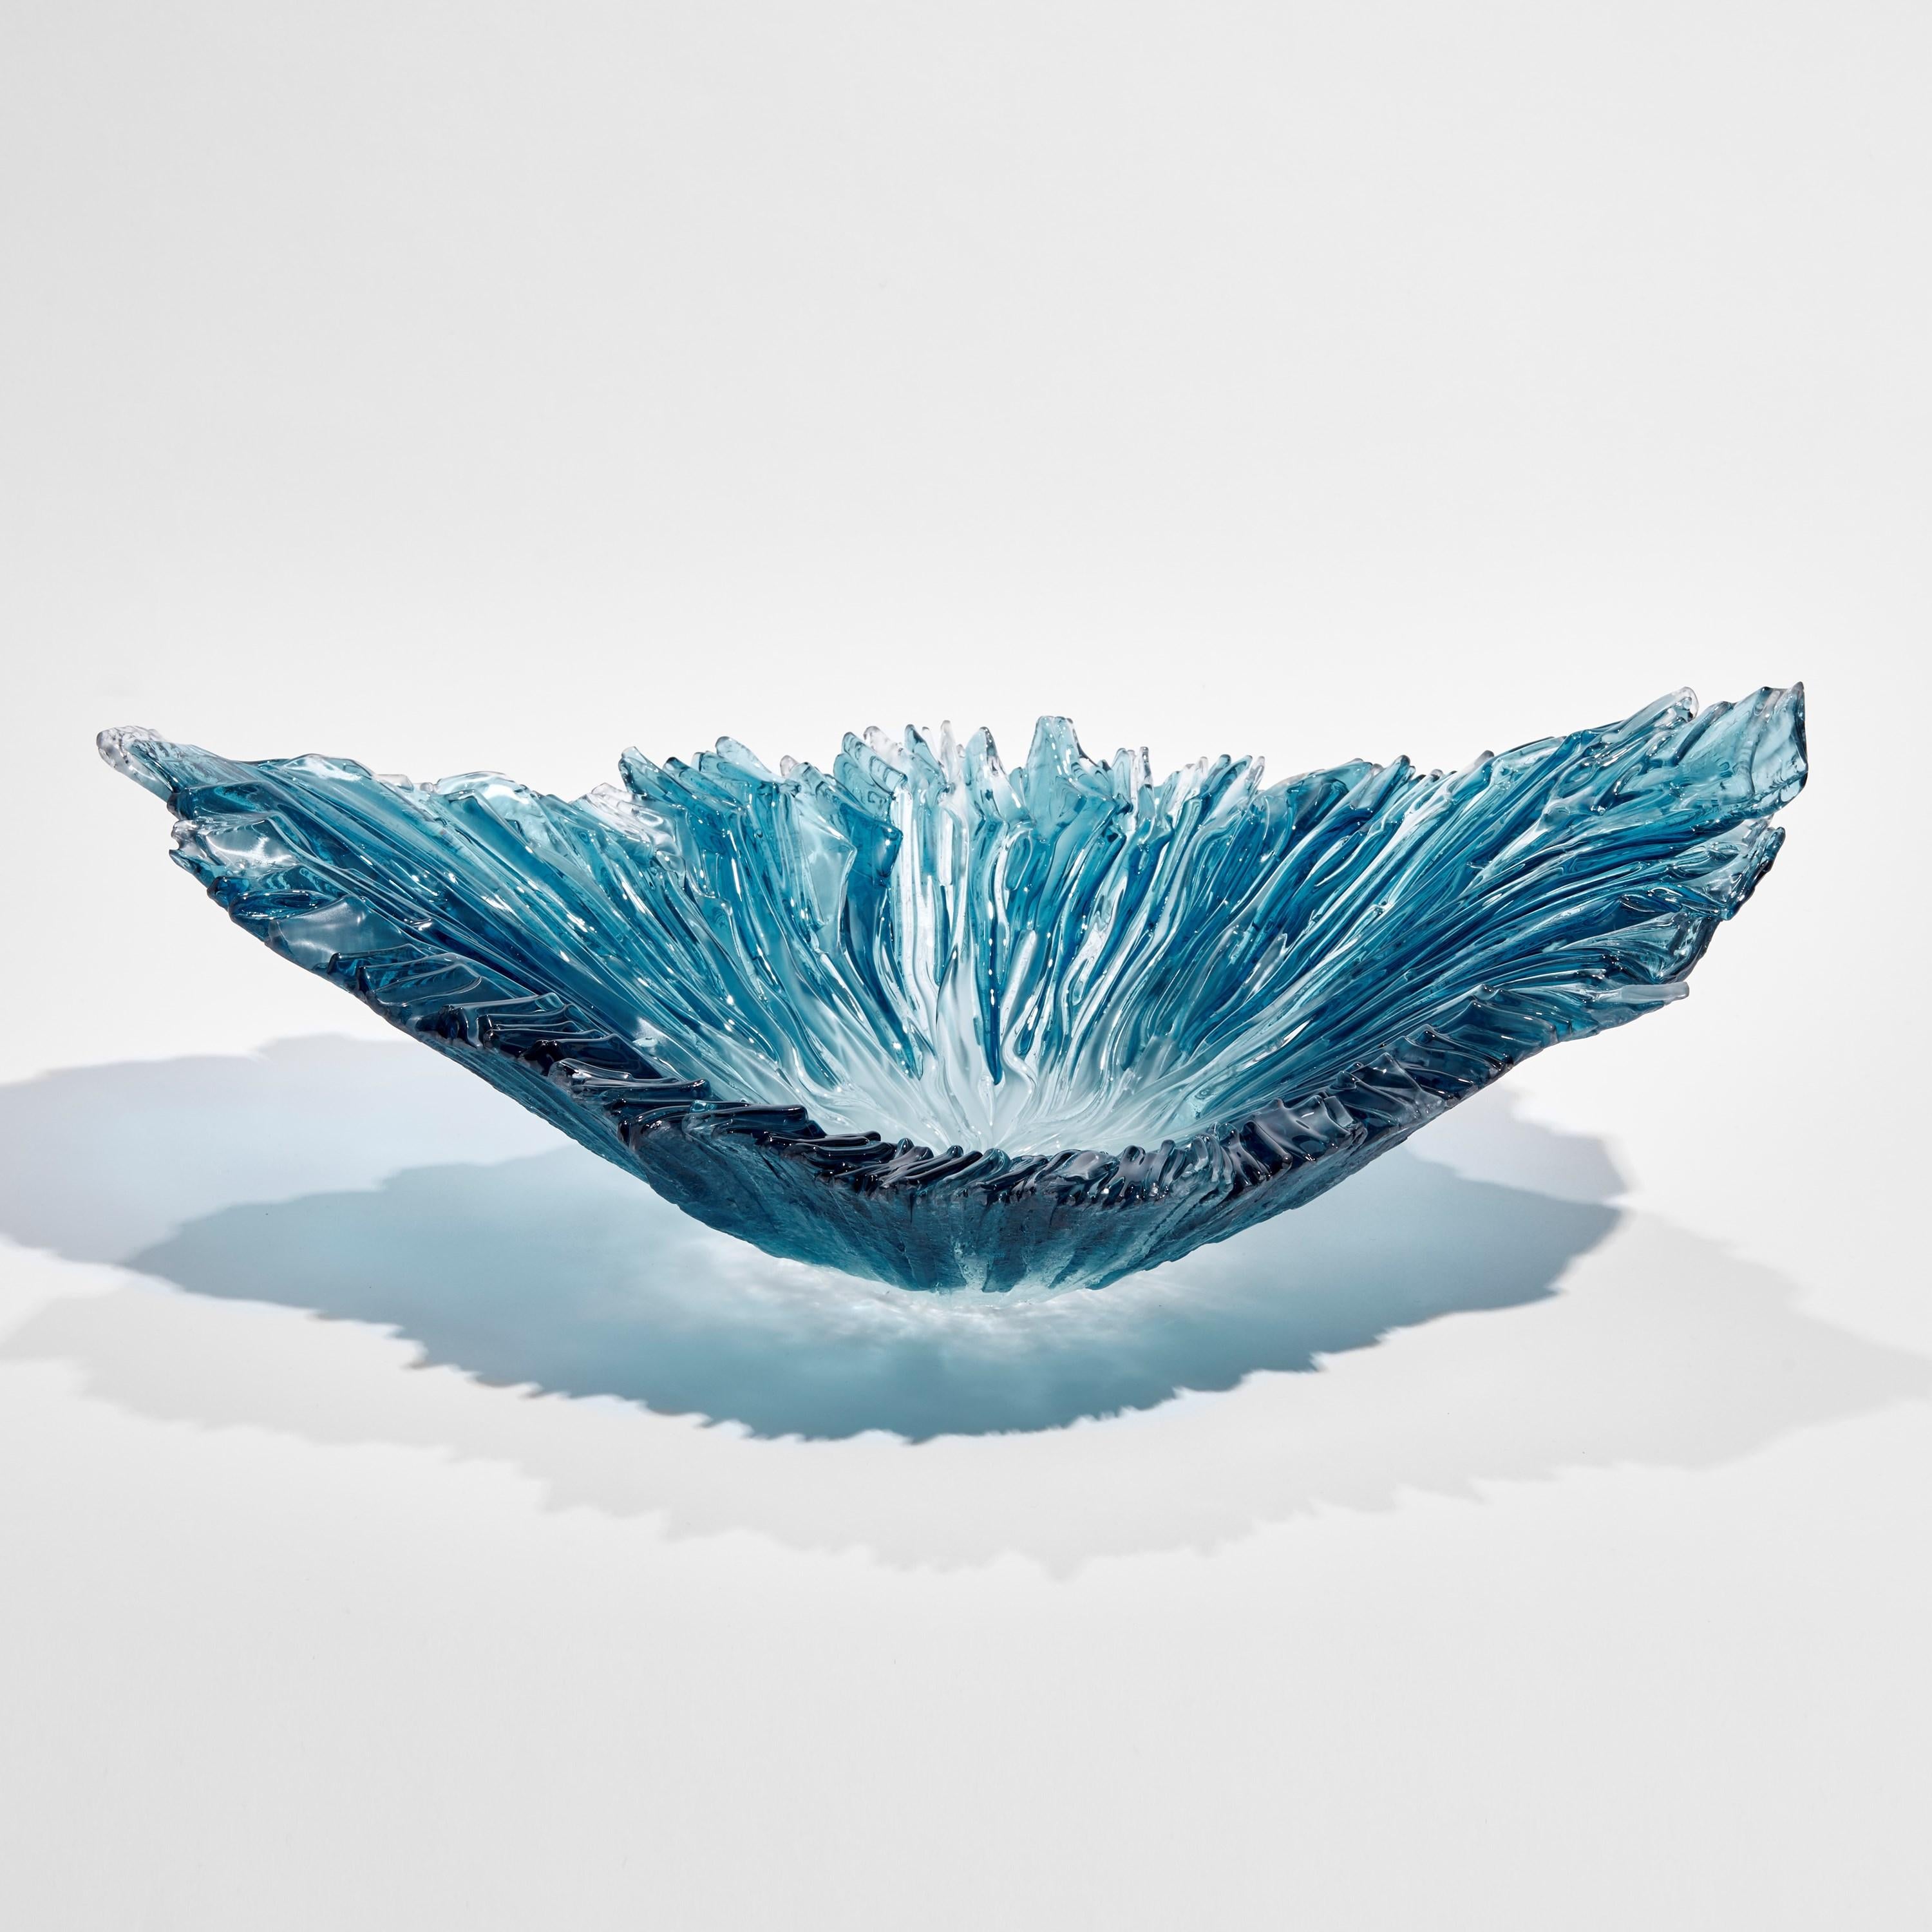 'Oval Coral Bowl in Aqua' is a unique artwork created by the British artist, Wayne Charmer. 

For Wayne Charmer, the fascination of glass is to exploit its translucent and reflective qualities. Inspired by nature, his signature techniques for his